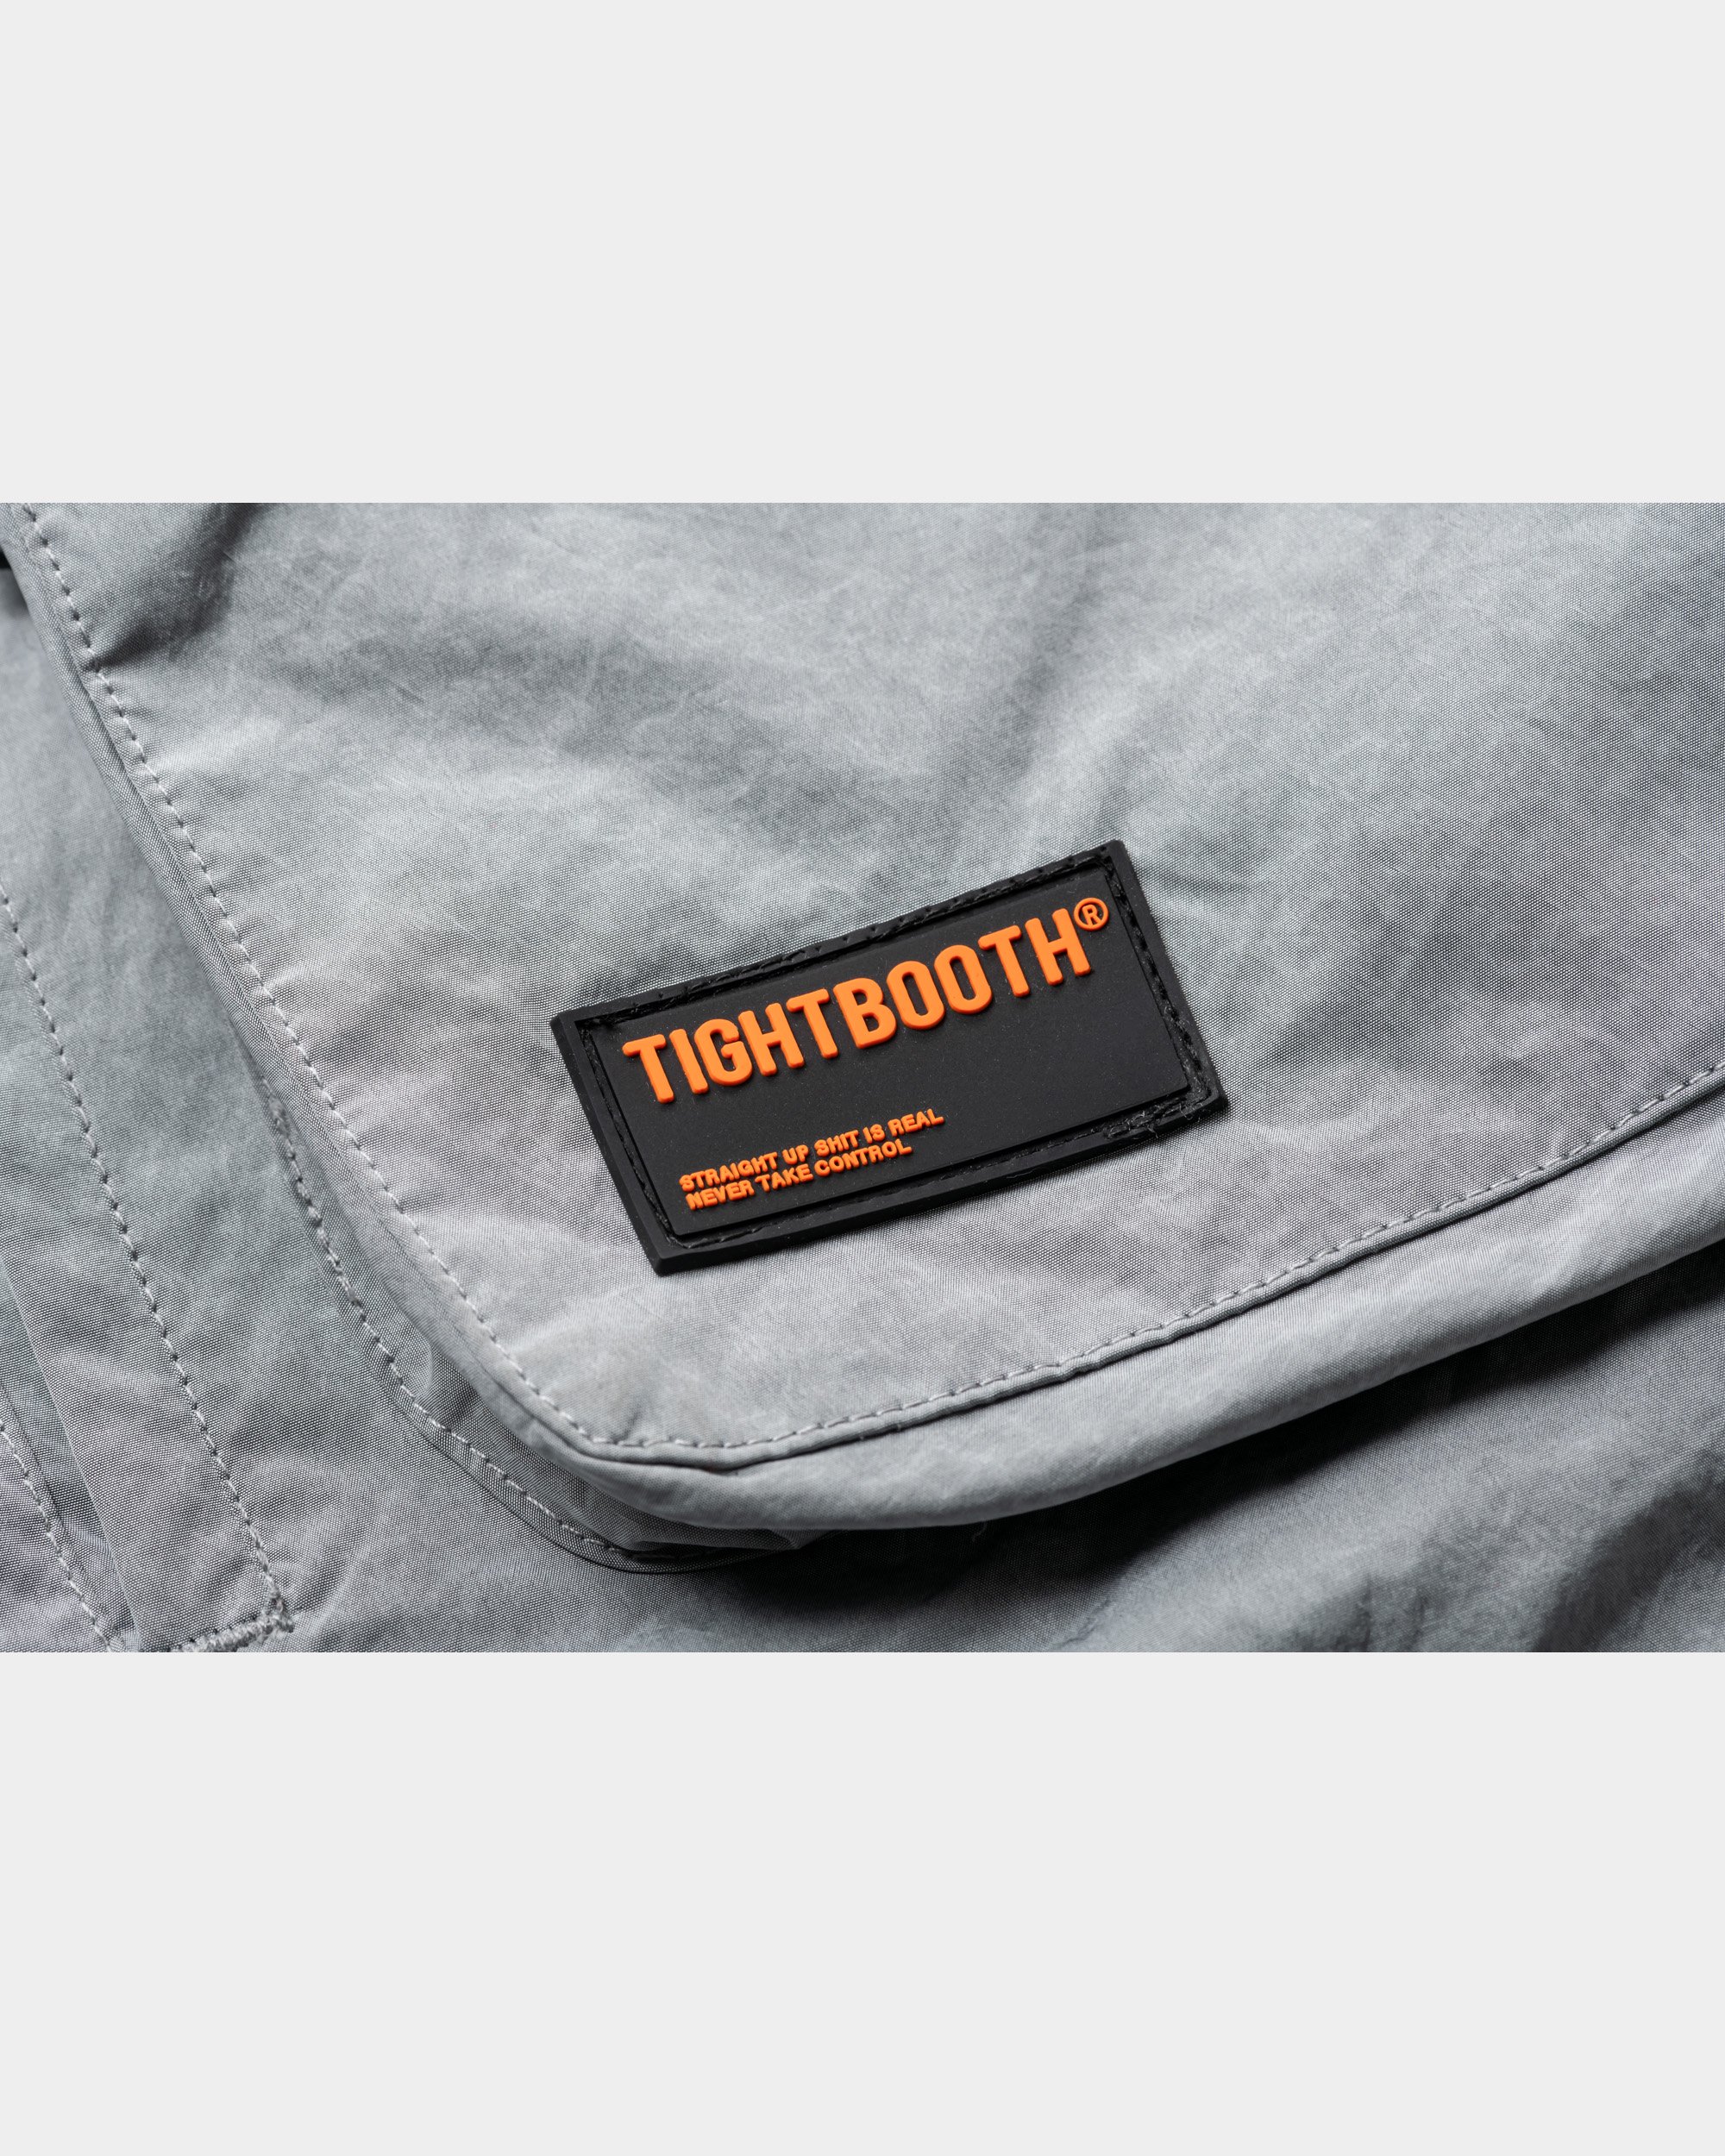 TIGHTBOOTH UTILITY PUFFY JKT GRAY L